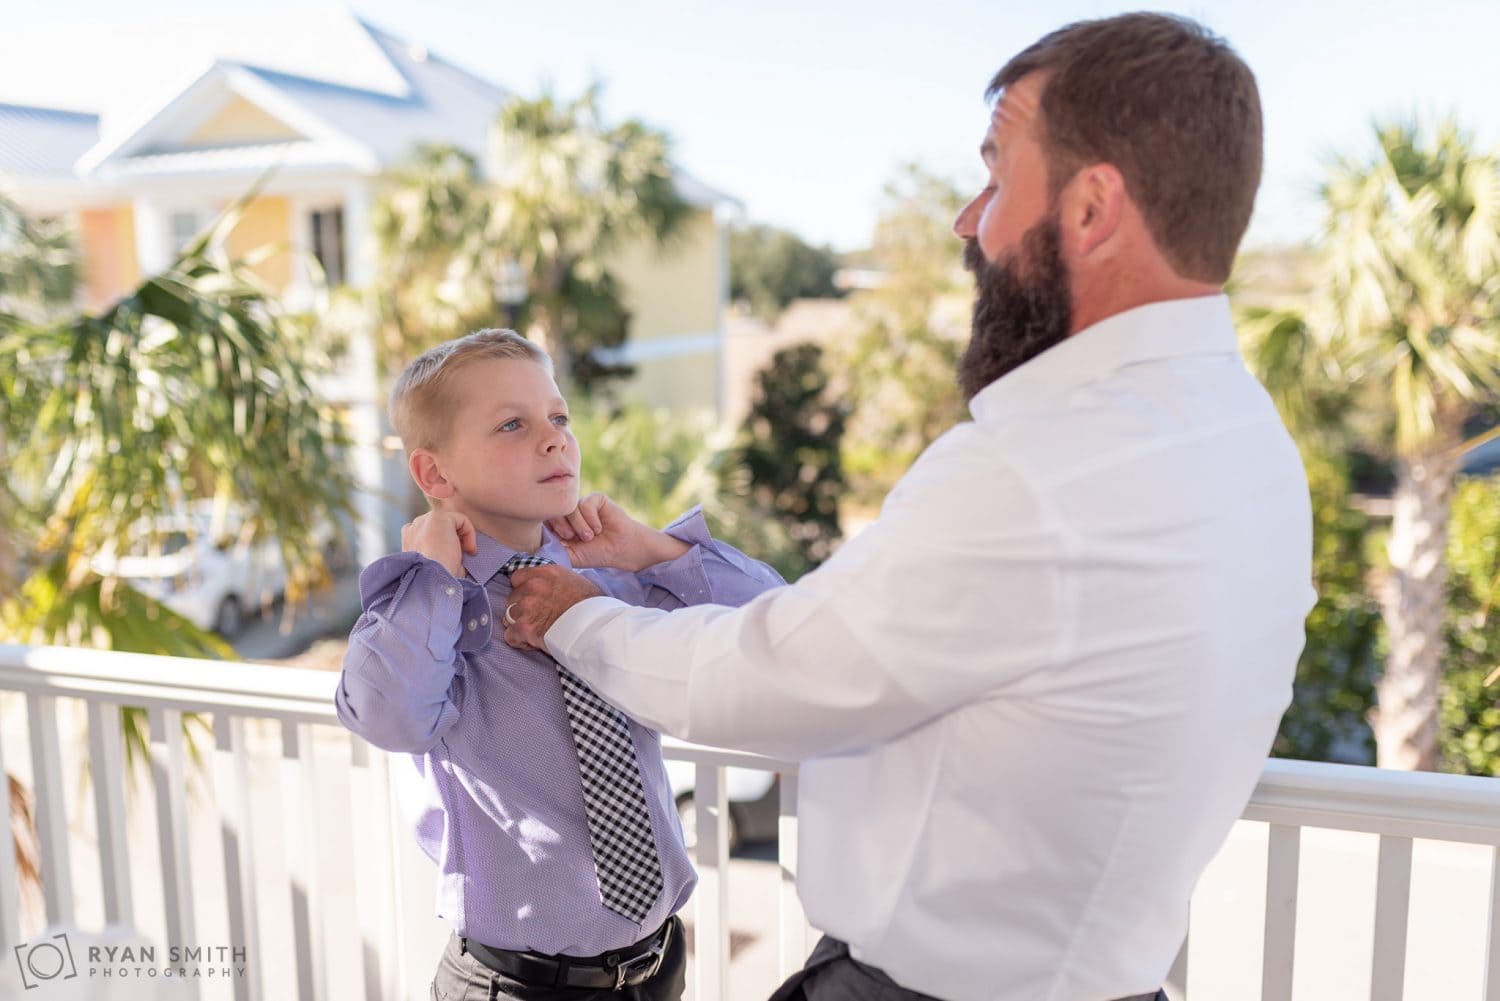 Dad putting on his son's tie 21 Main Events at North Beach